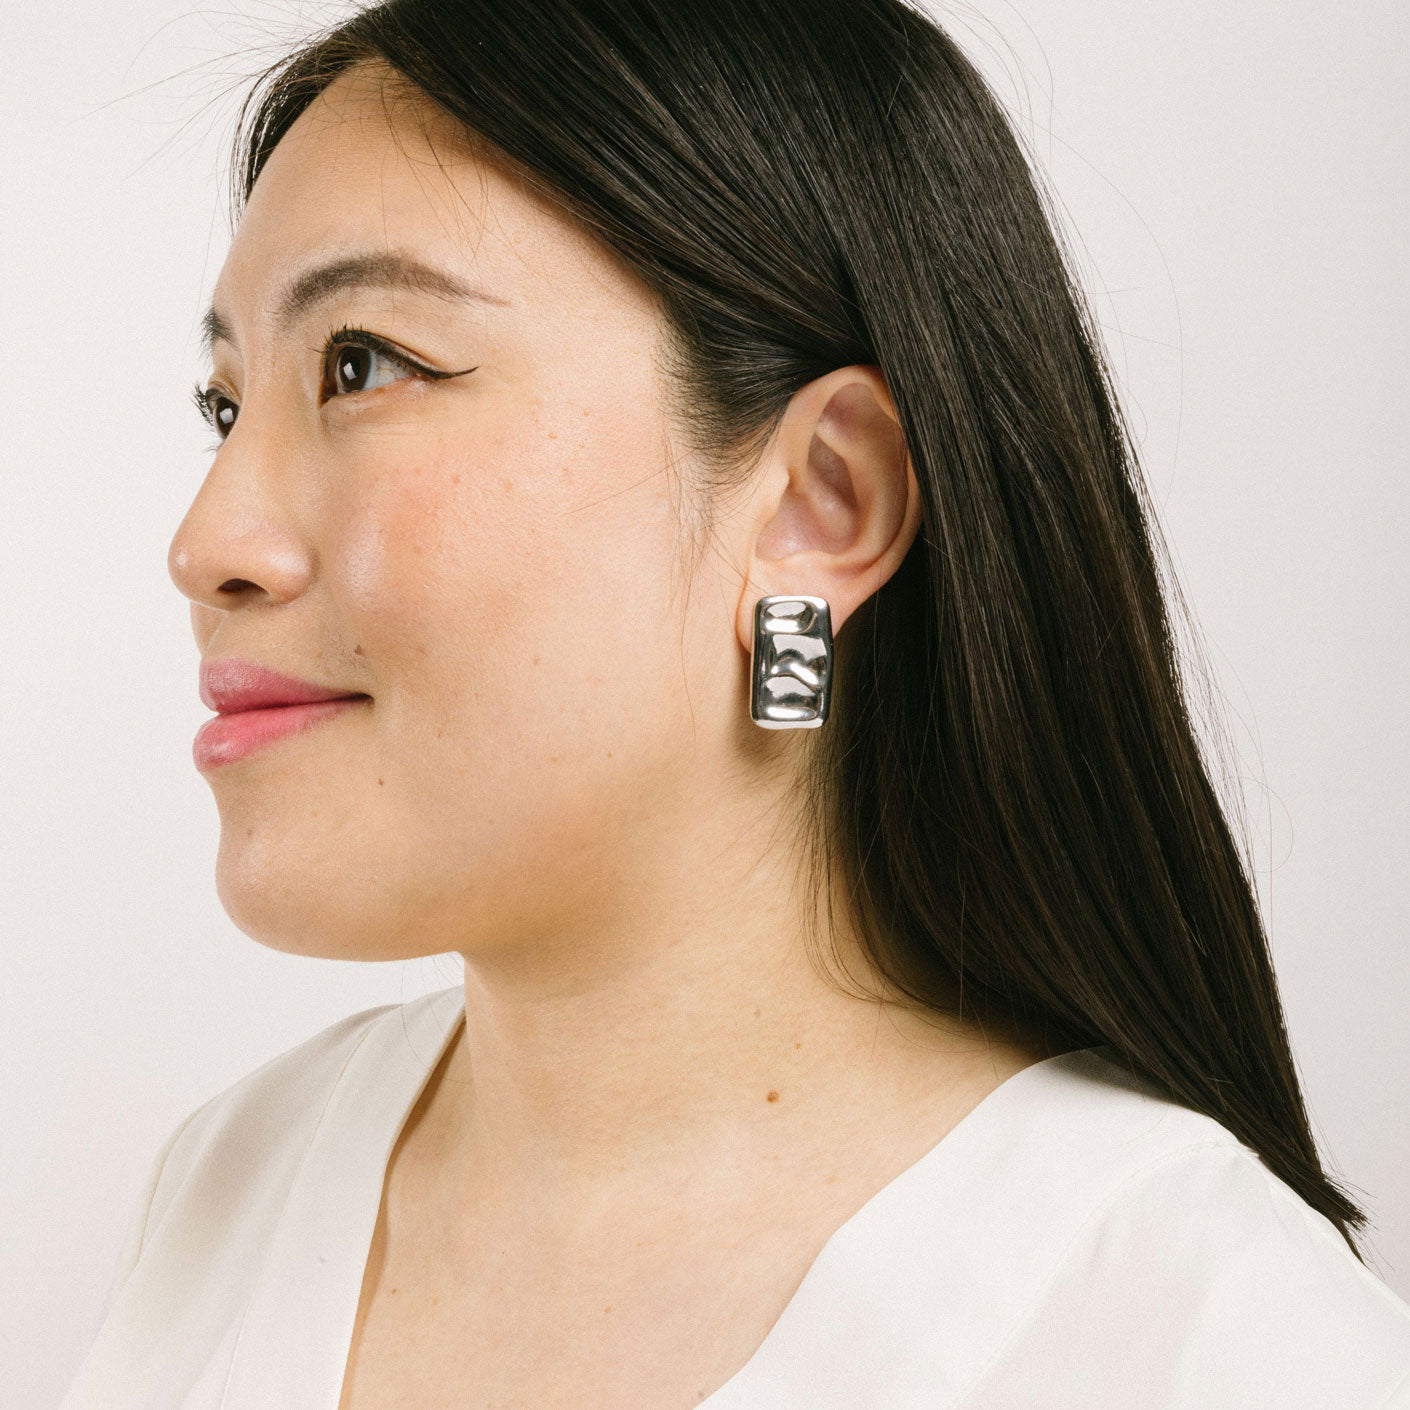 A model wearing the Nova Clip On Earrings in Silver feature a padded clip-on closure and are suitable for all ear types, including thick/large ears, thin/small ears, and even ears that are healing or stretched. Expect a secure and comfortable hold for 8 - 12 hours. Crafted using a silver tone copper alloy, this piece contains one pair of removable rubber-padded clip-on earrings.